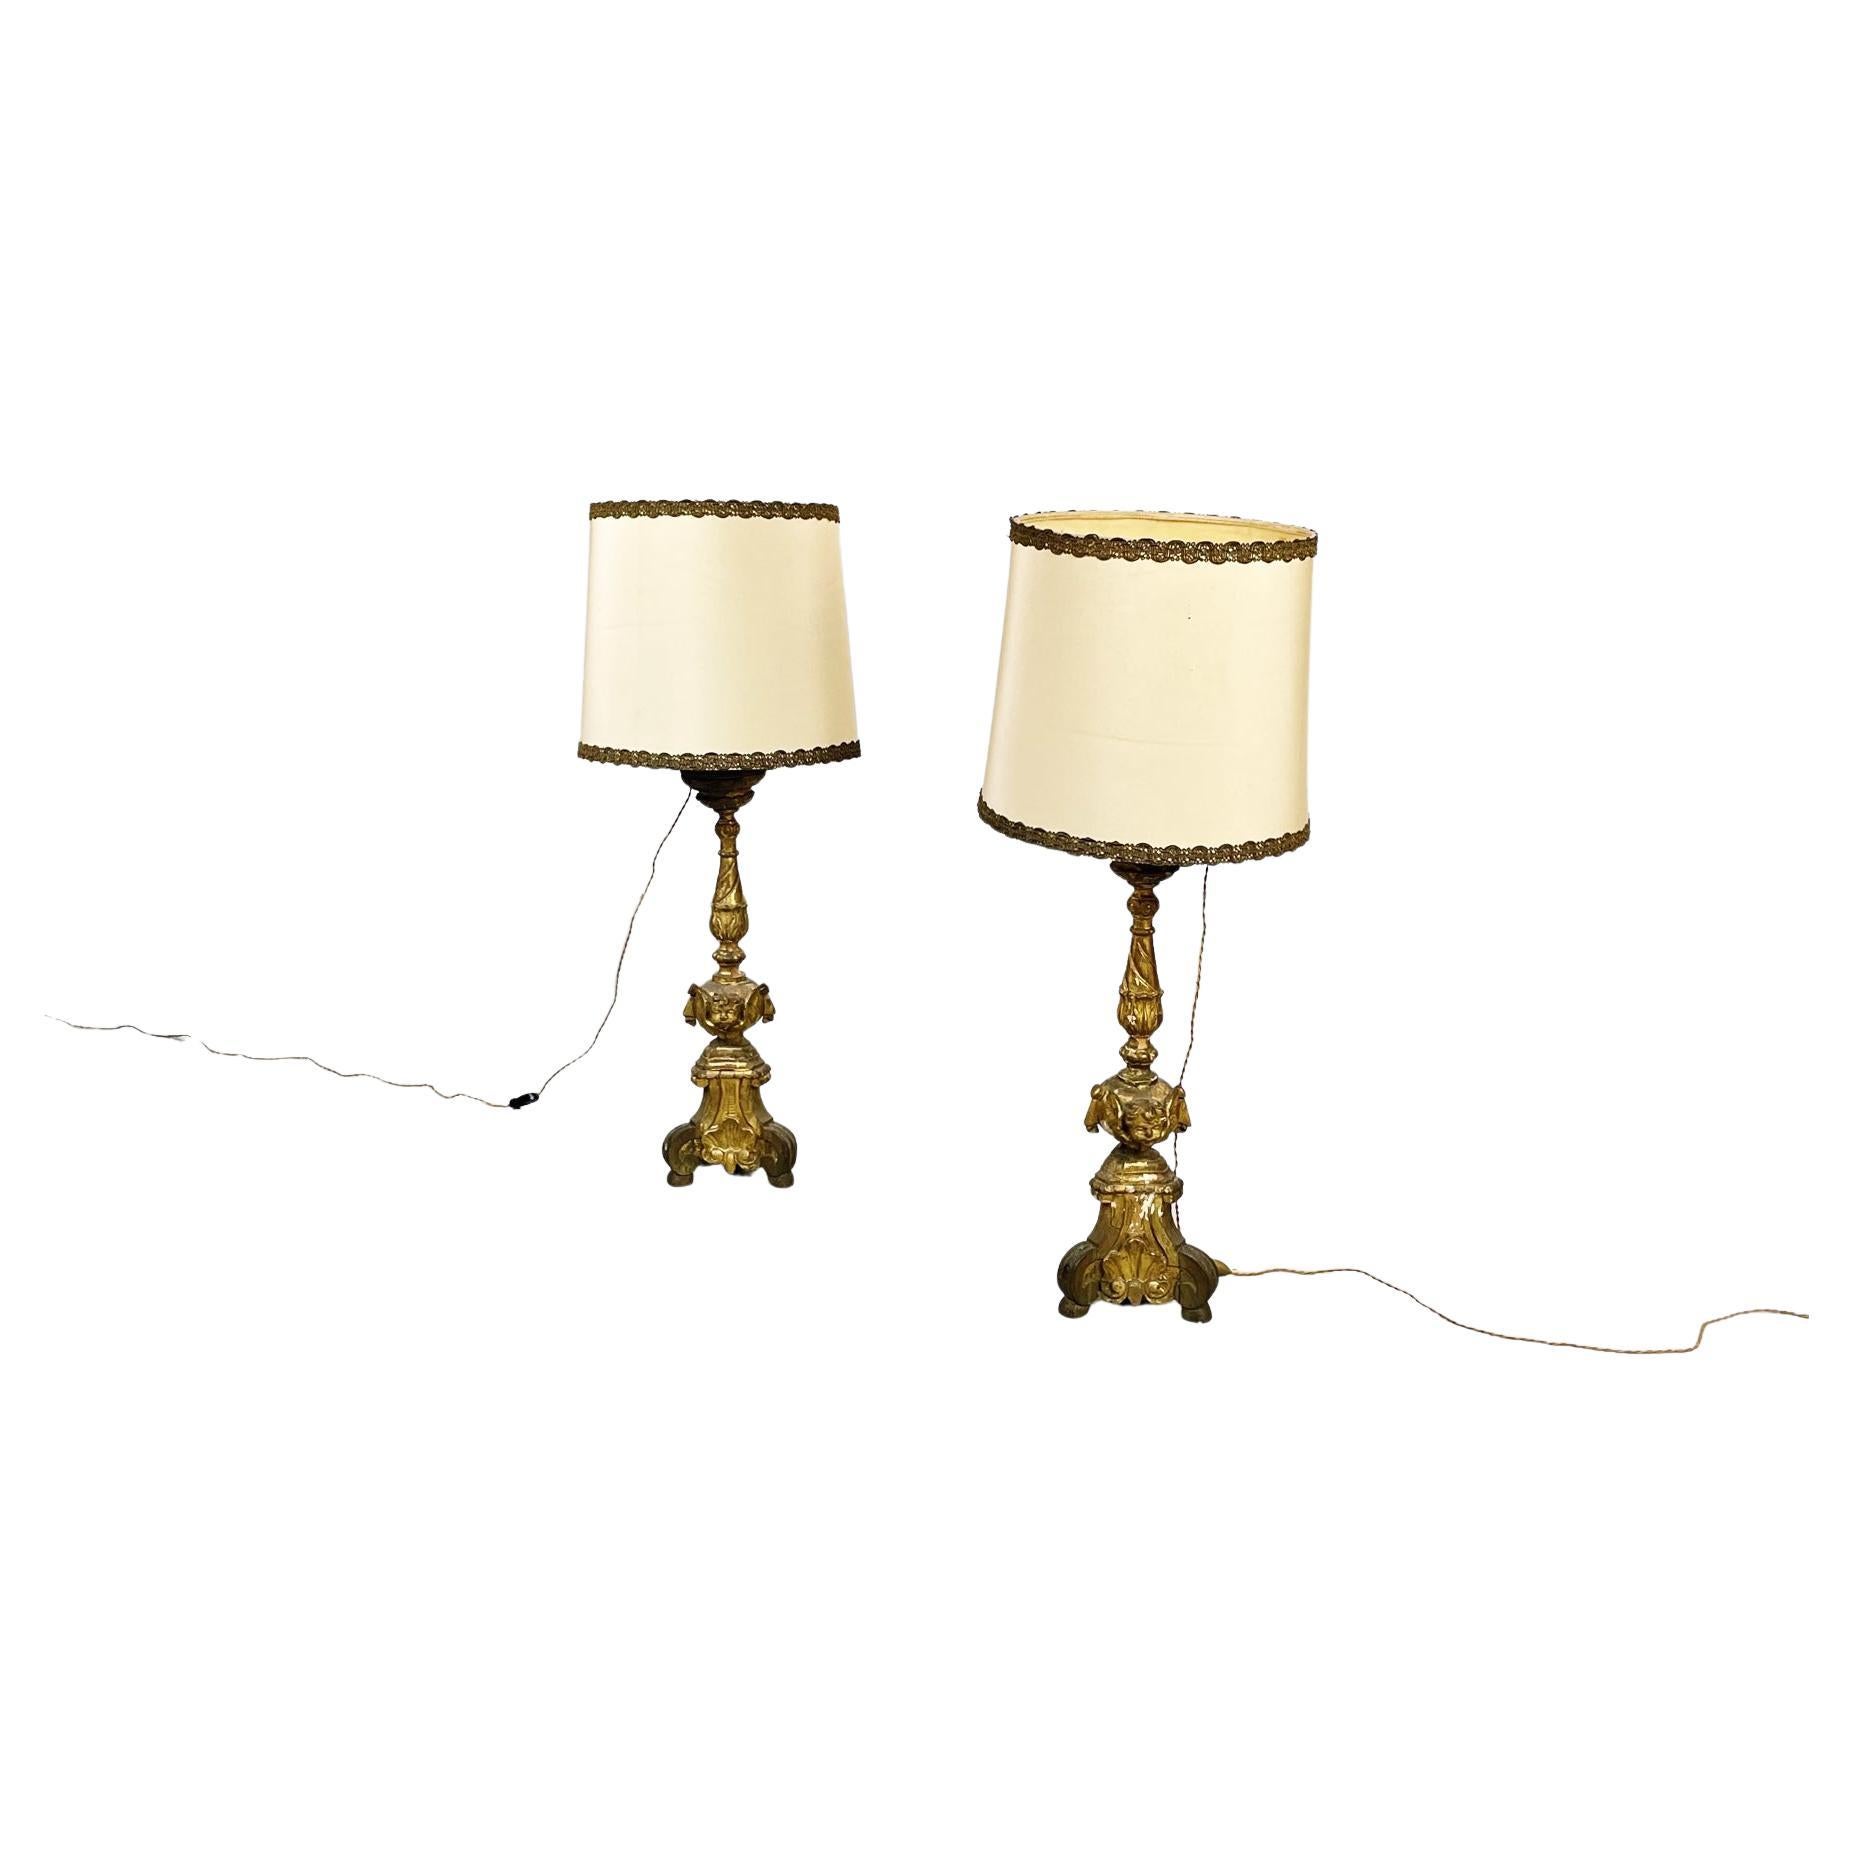 Italian Antique Candelabra Lamps in Gold Painted Wood and Beige Fabric, 1800s